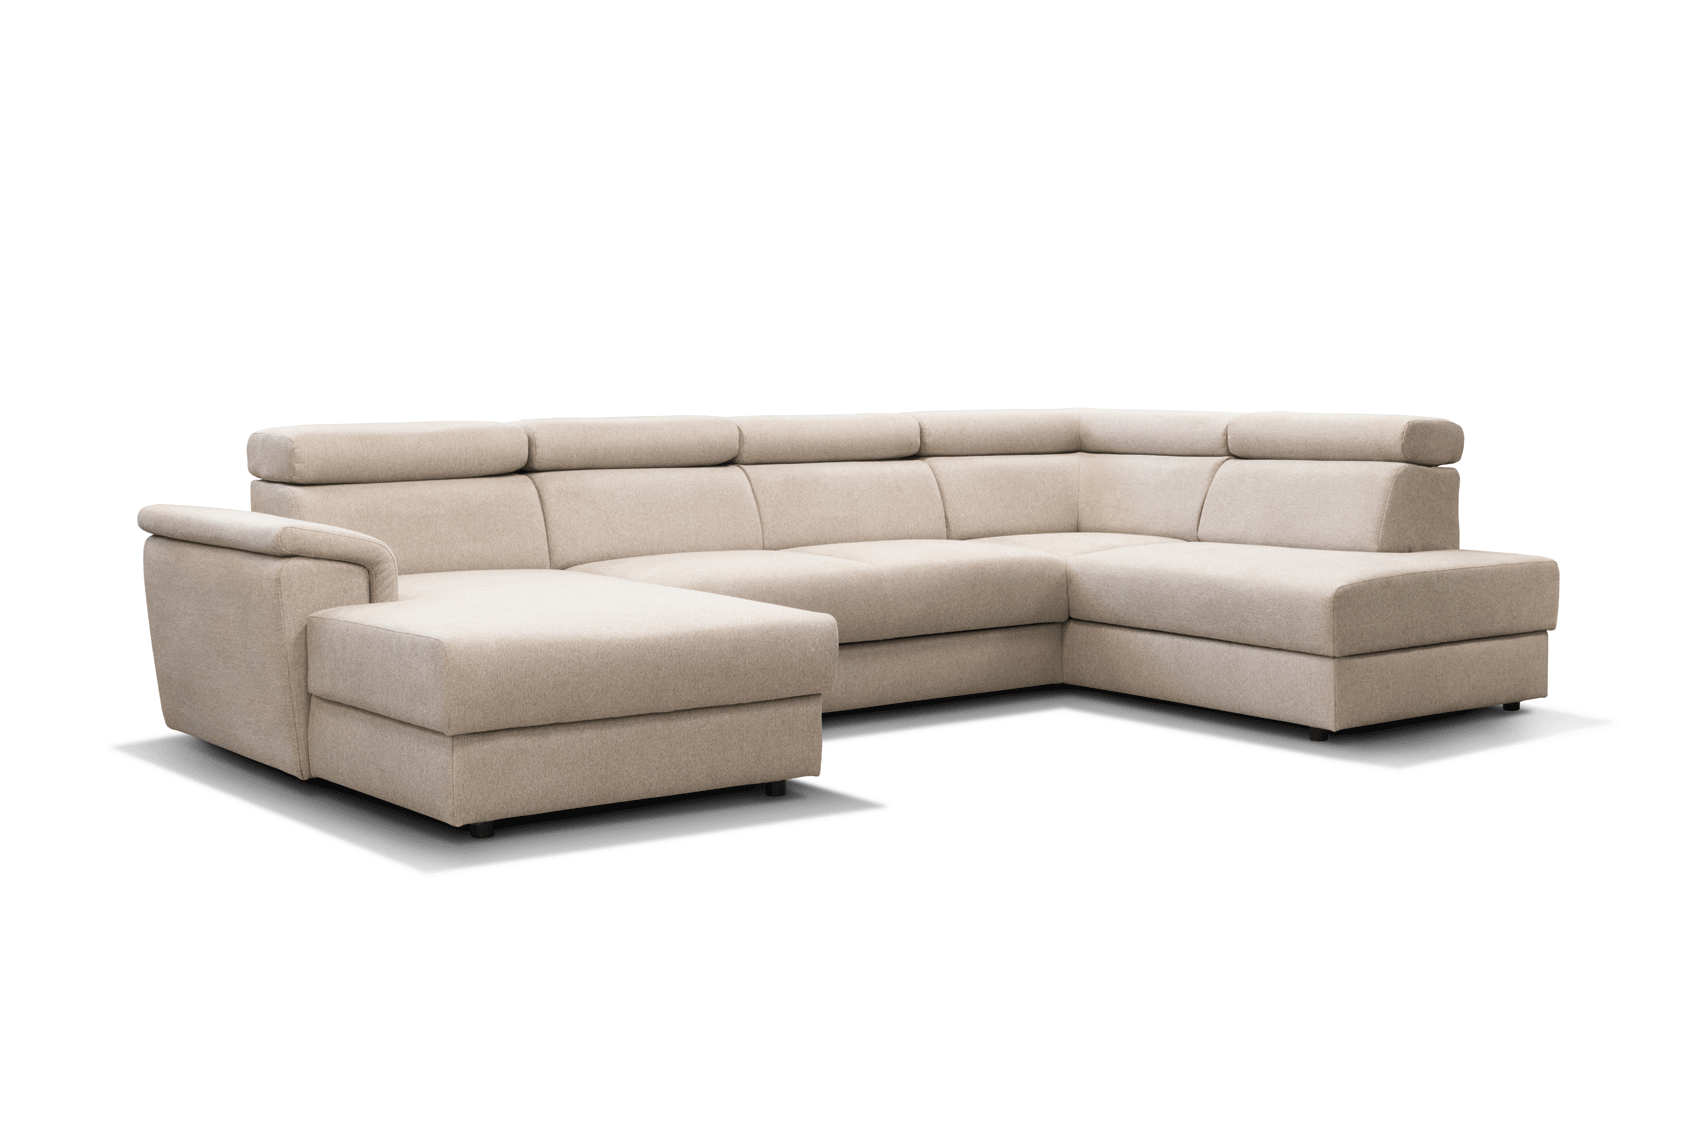 Living Room Furniture Sleepers Sofas Loveseats and Chairs Bolt Sectional w/Bed